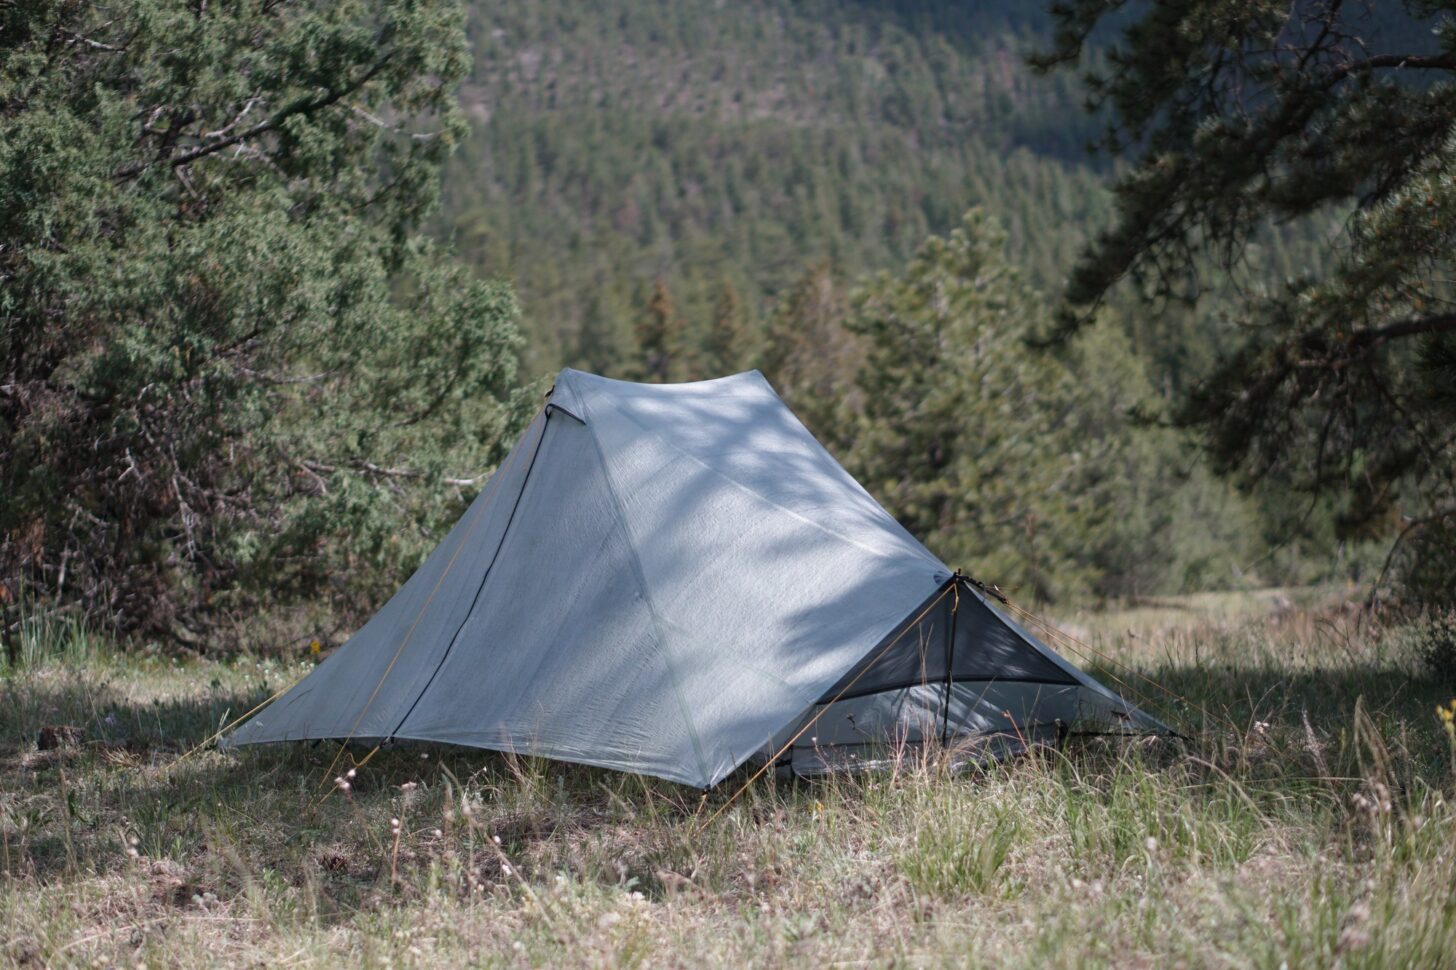 a medium shot of the Tarptent Dipole in a field.